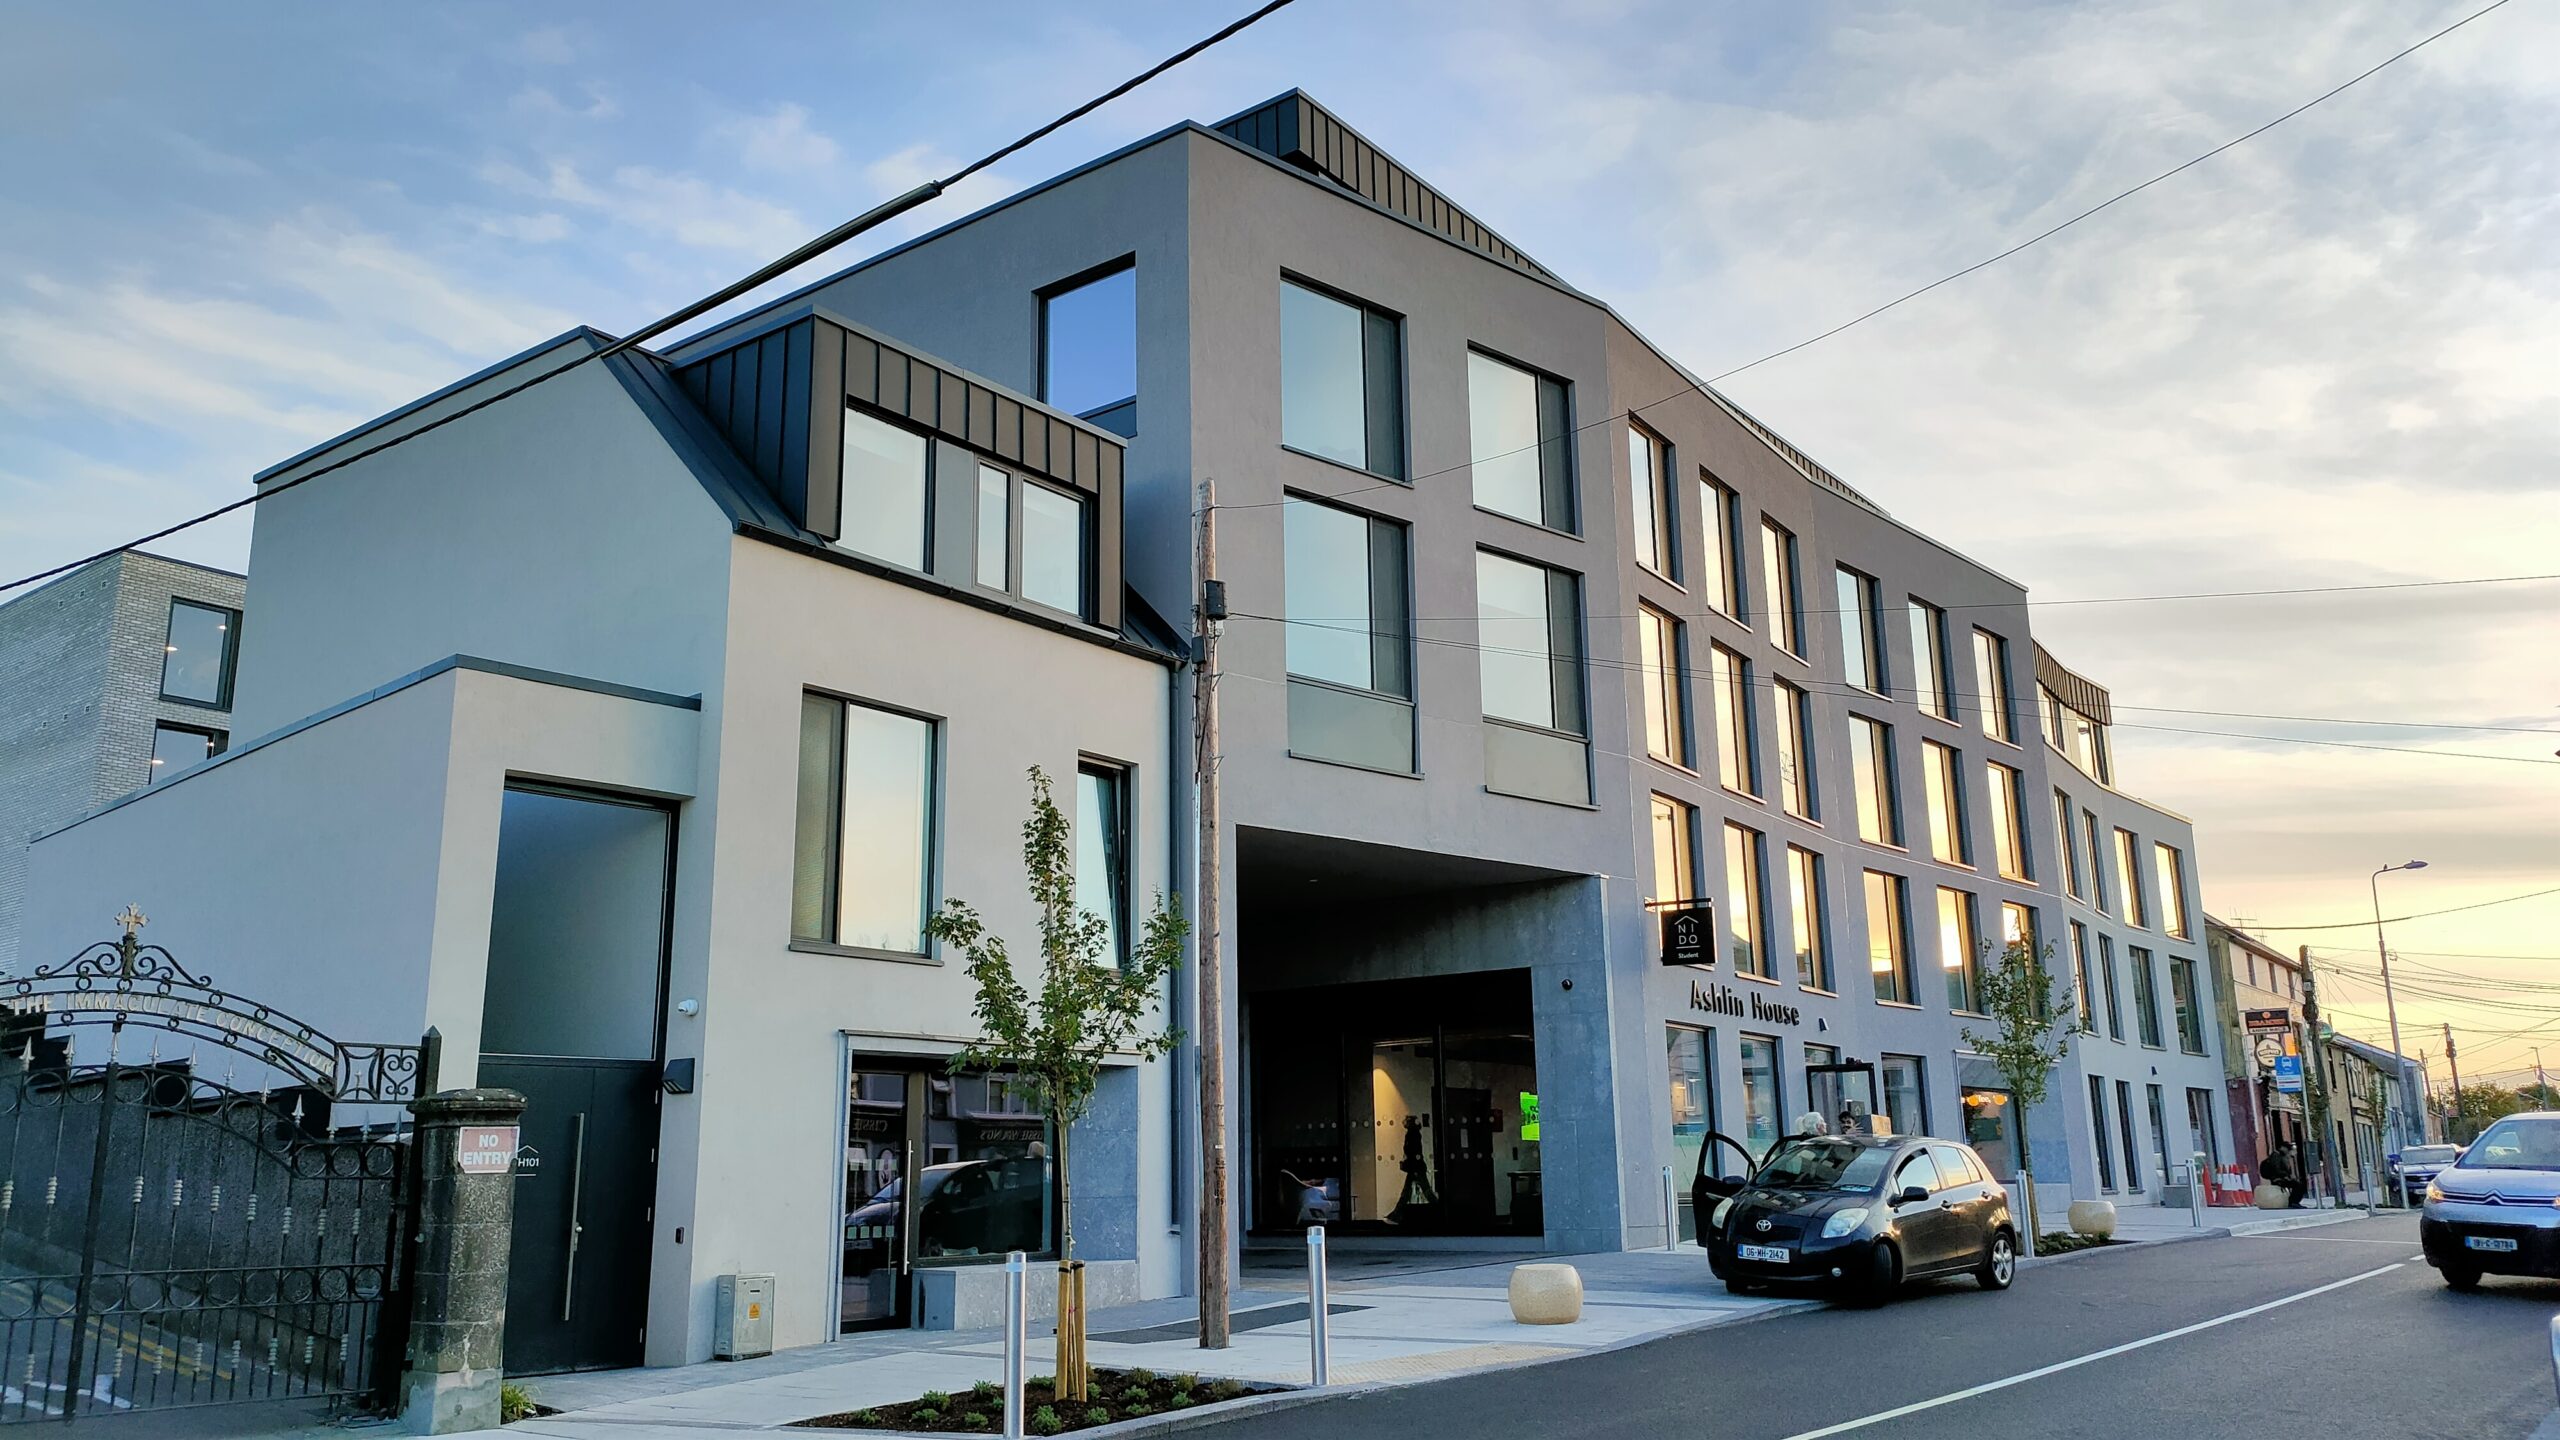 Waterproofing Membranes Supplied for Student Accommodation in Cork